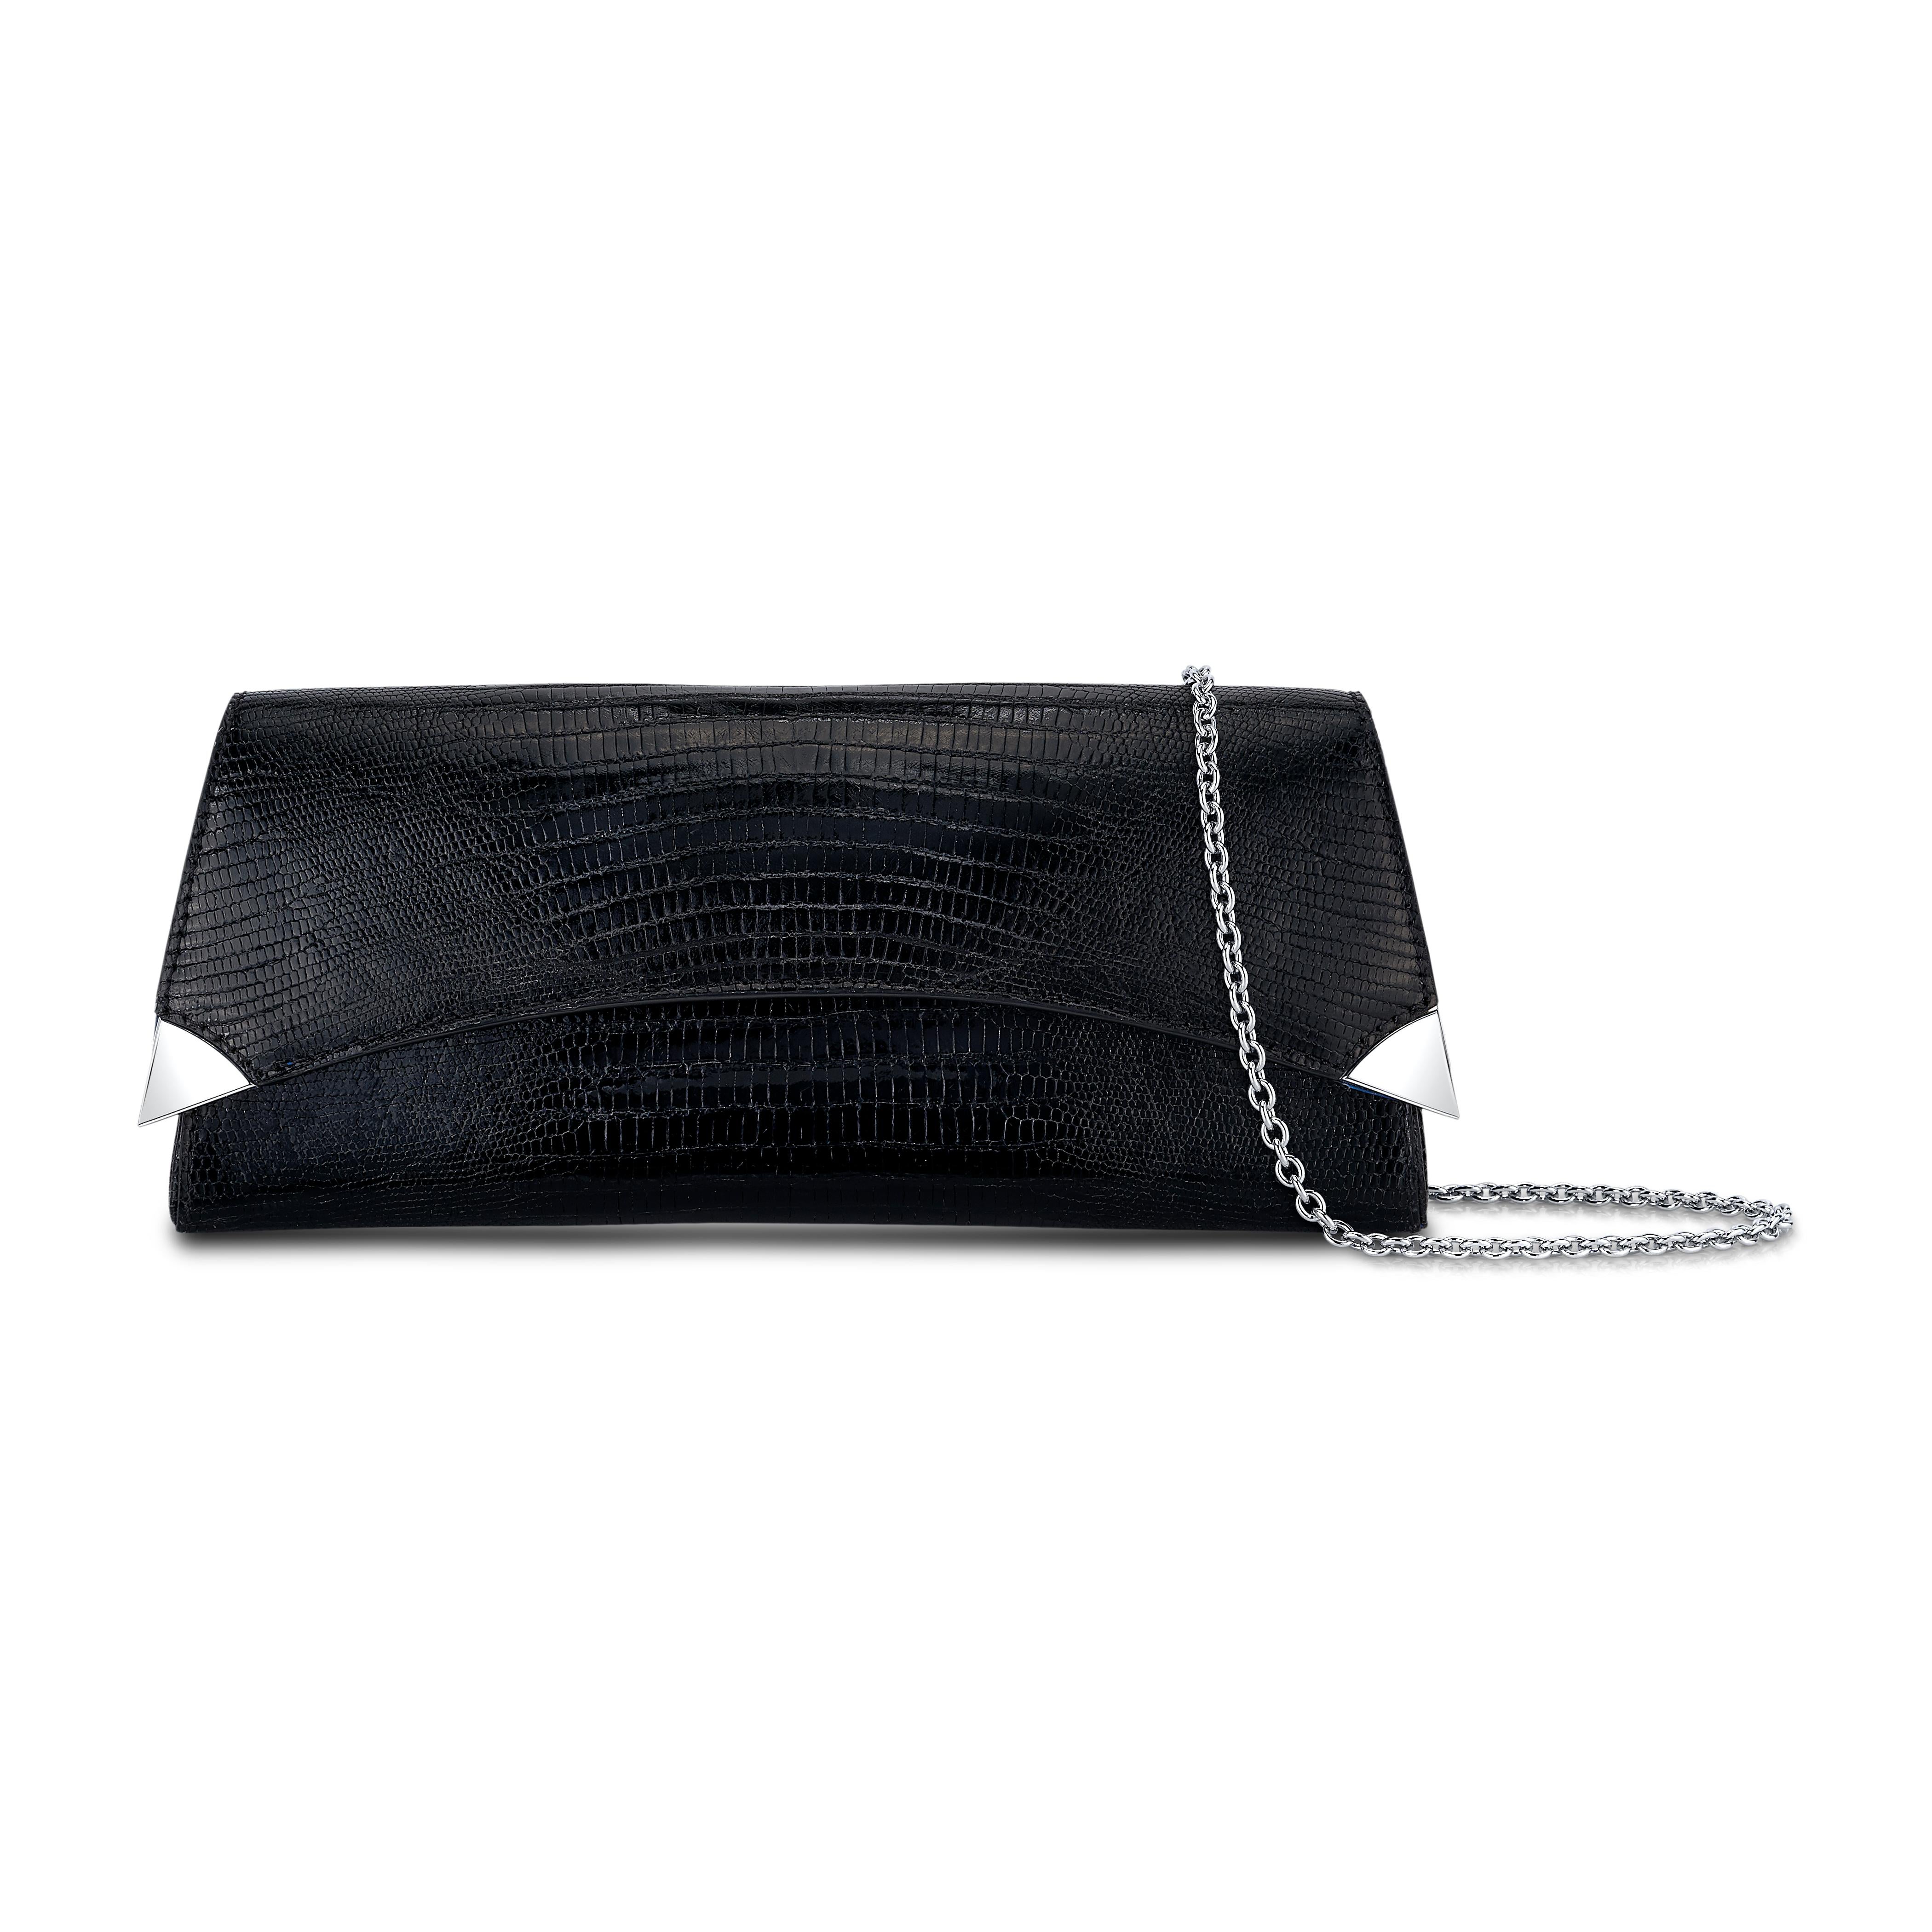 The Veronica in Black Glitter Lizard is designed with a three-quarter front flap and a magnetic snap closure. The clutch features a rounded back providing an extra spacious interior. It fits the large iPhone has a hidden back pocket, customized